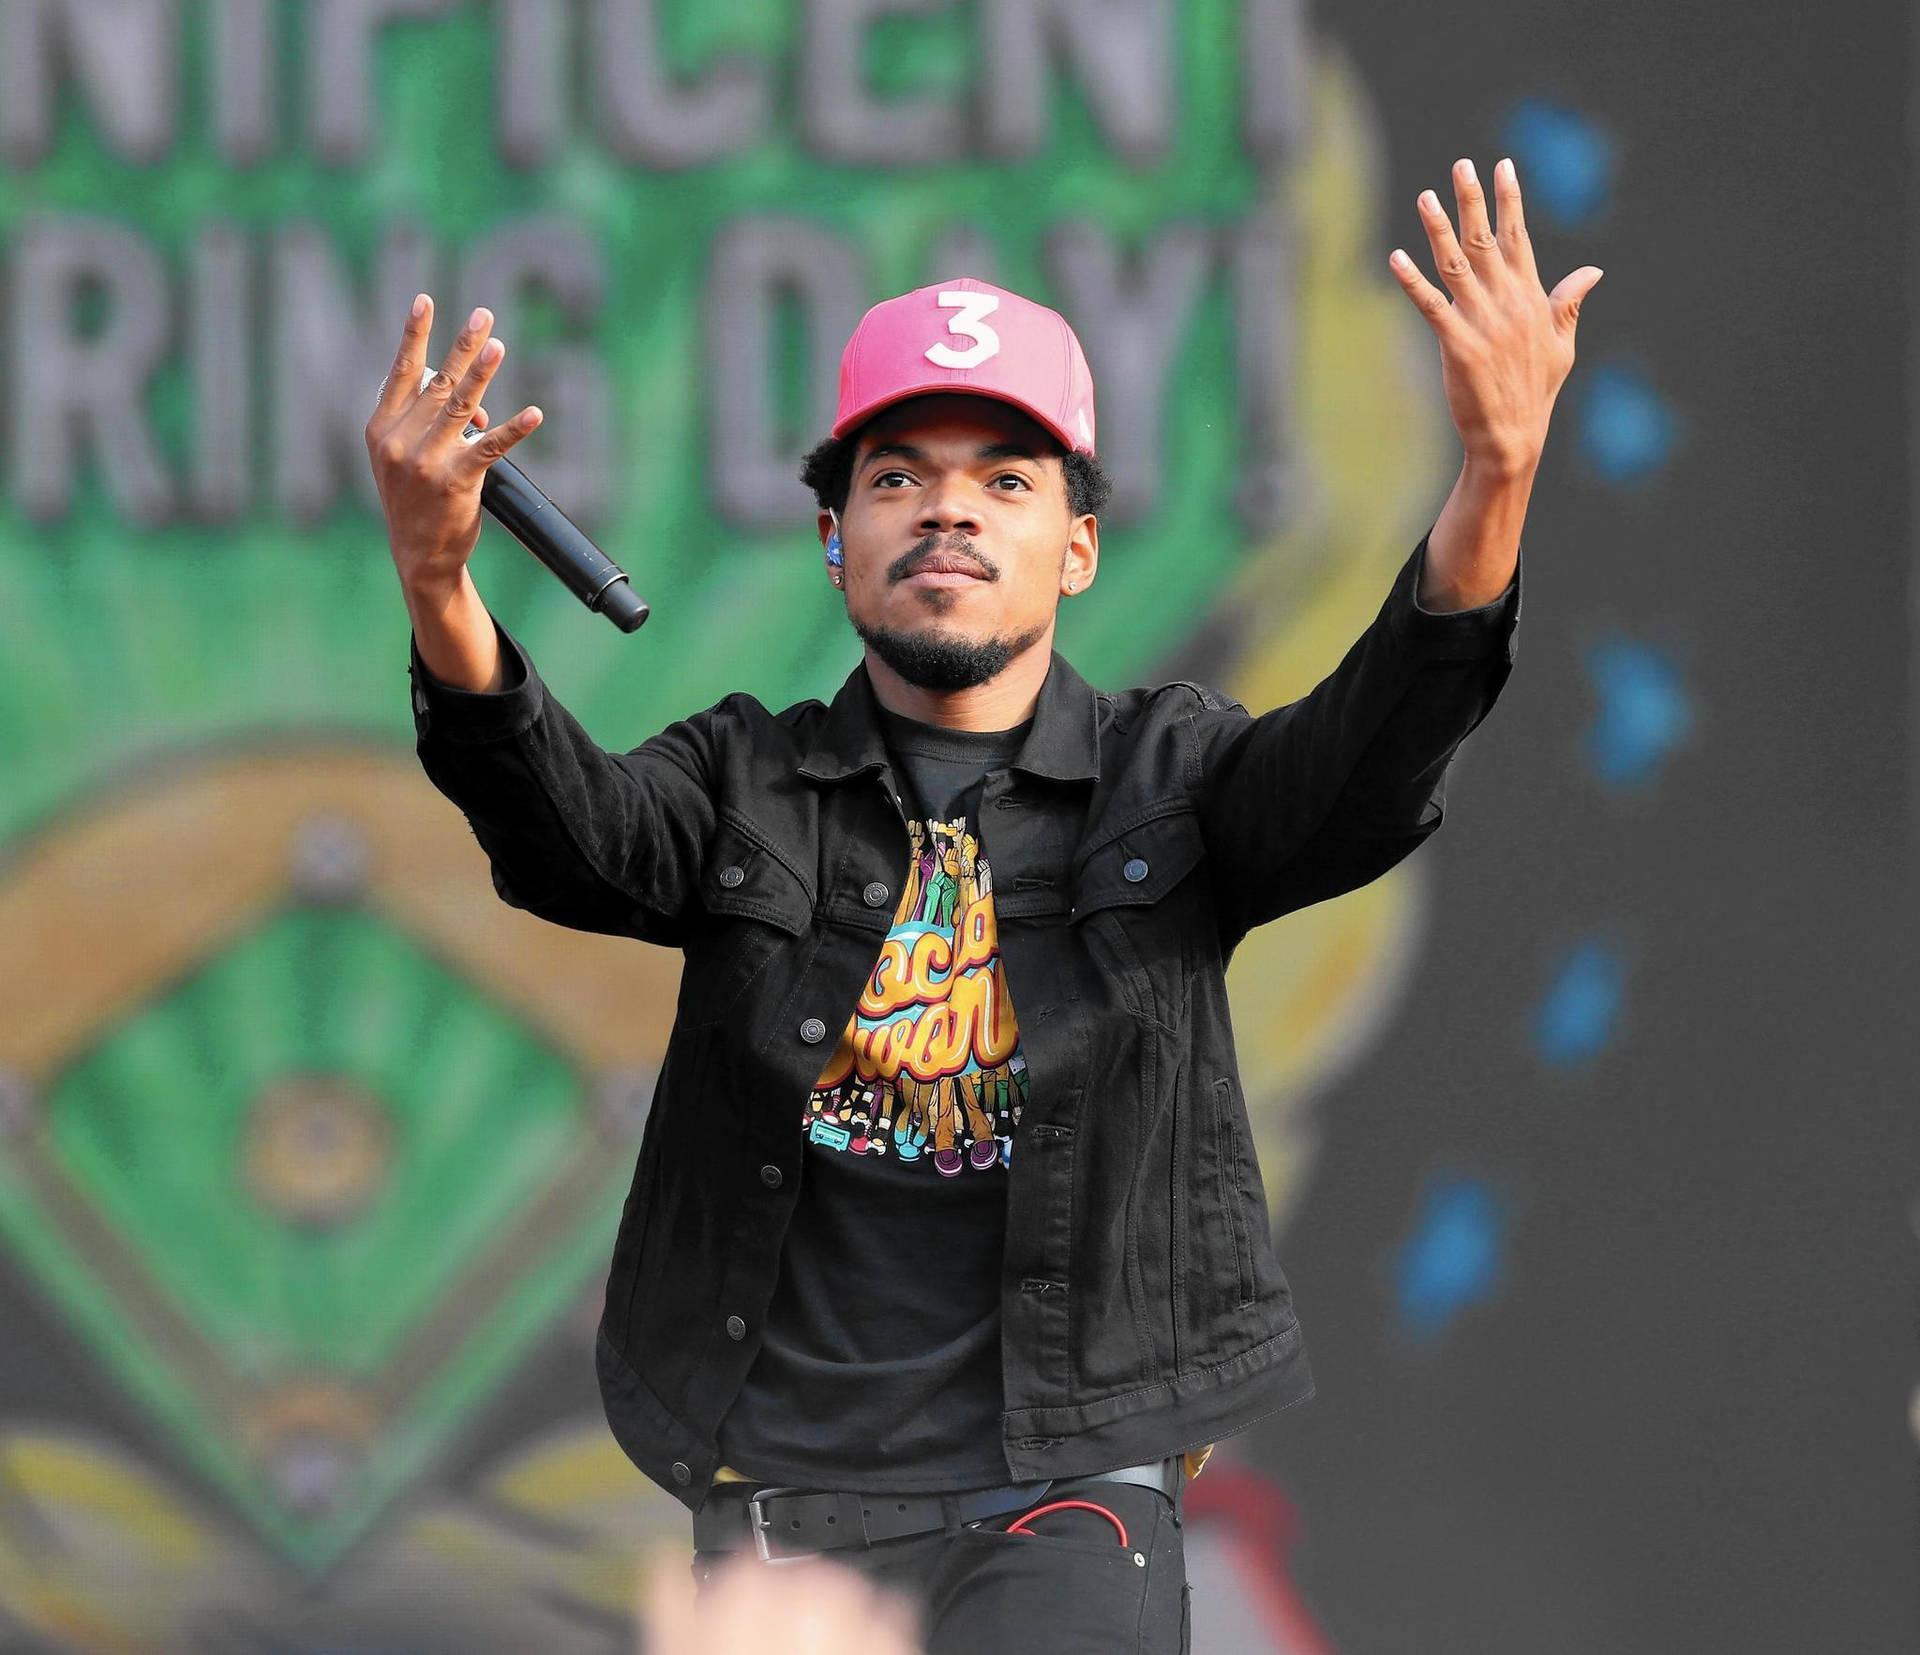 Chance The Rapper Hands Up Background